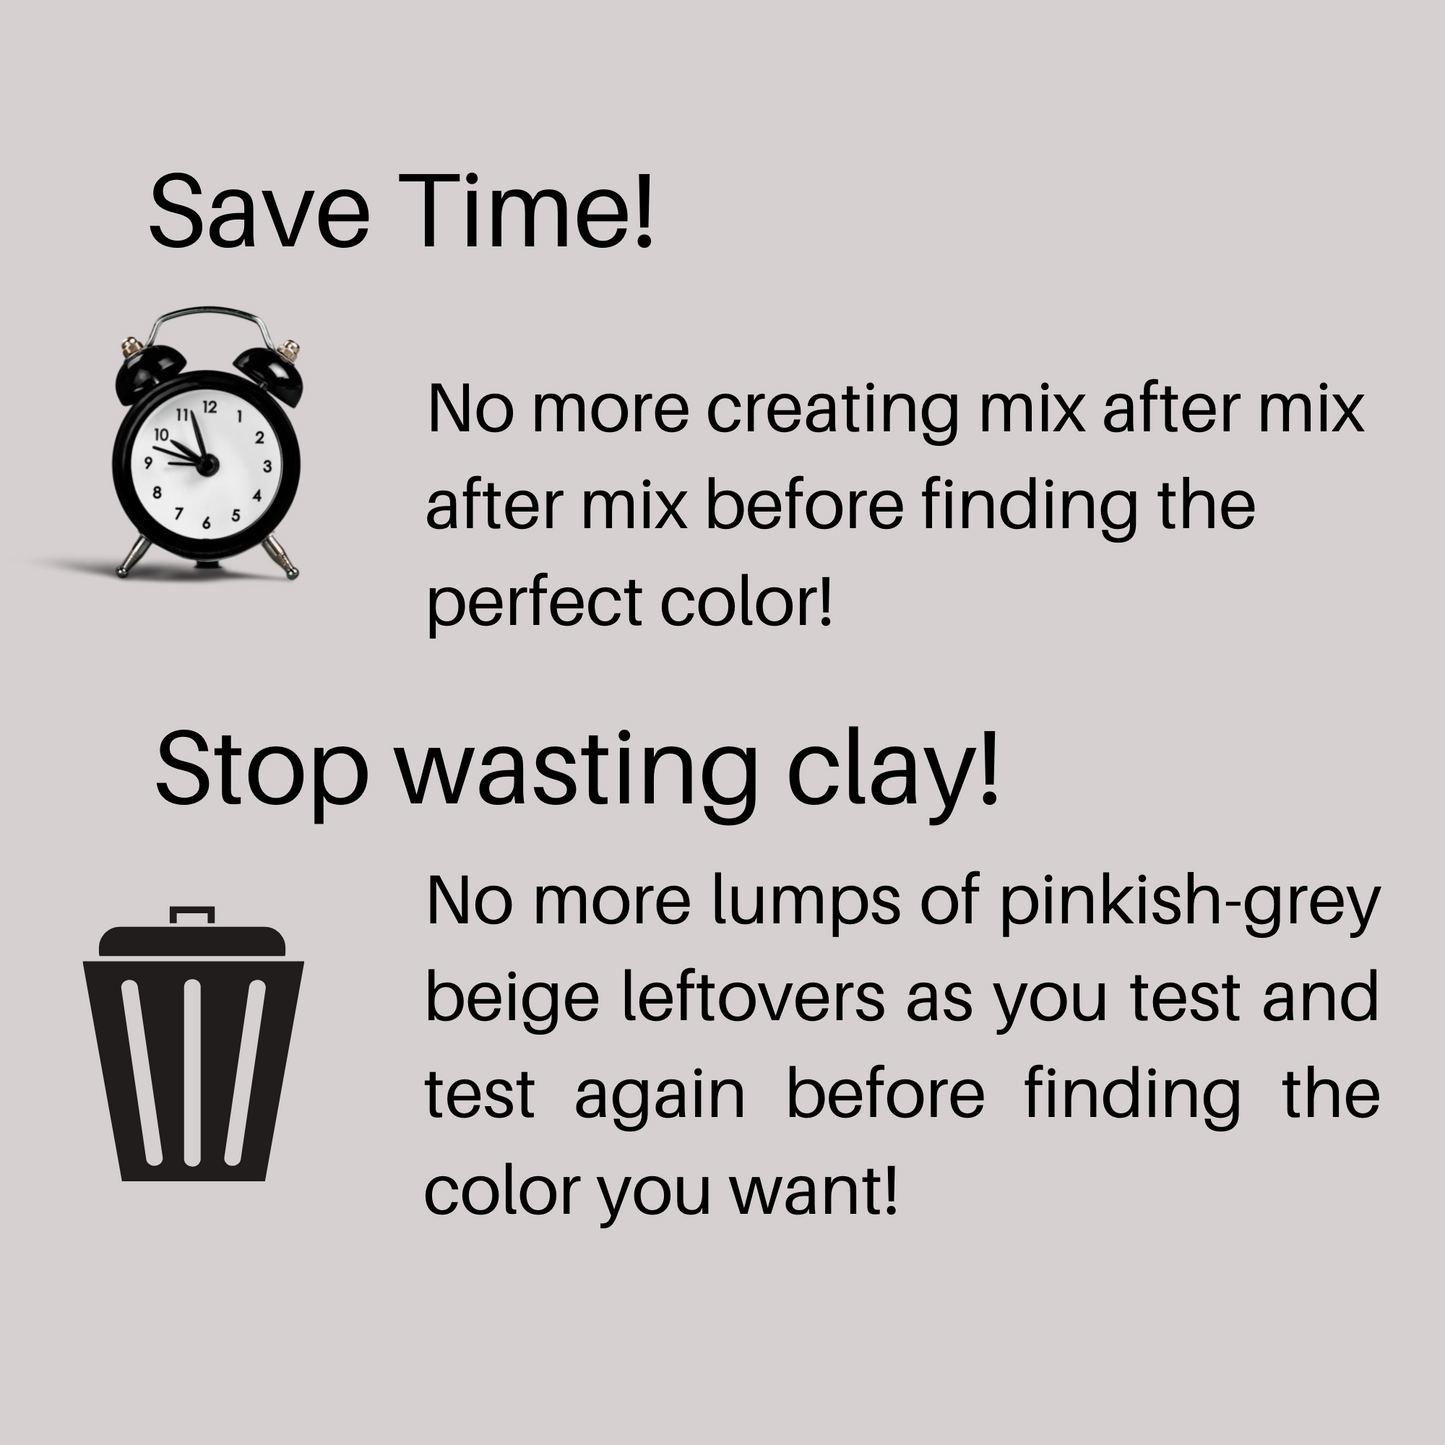 Save Time, Stop Wasting Clay